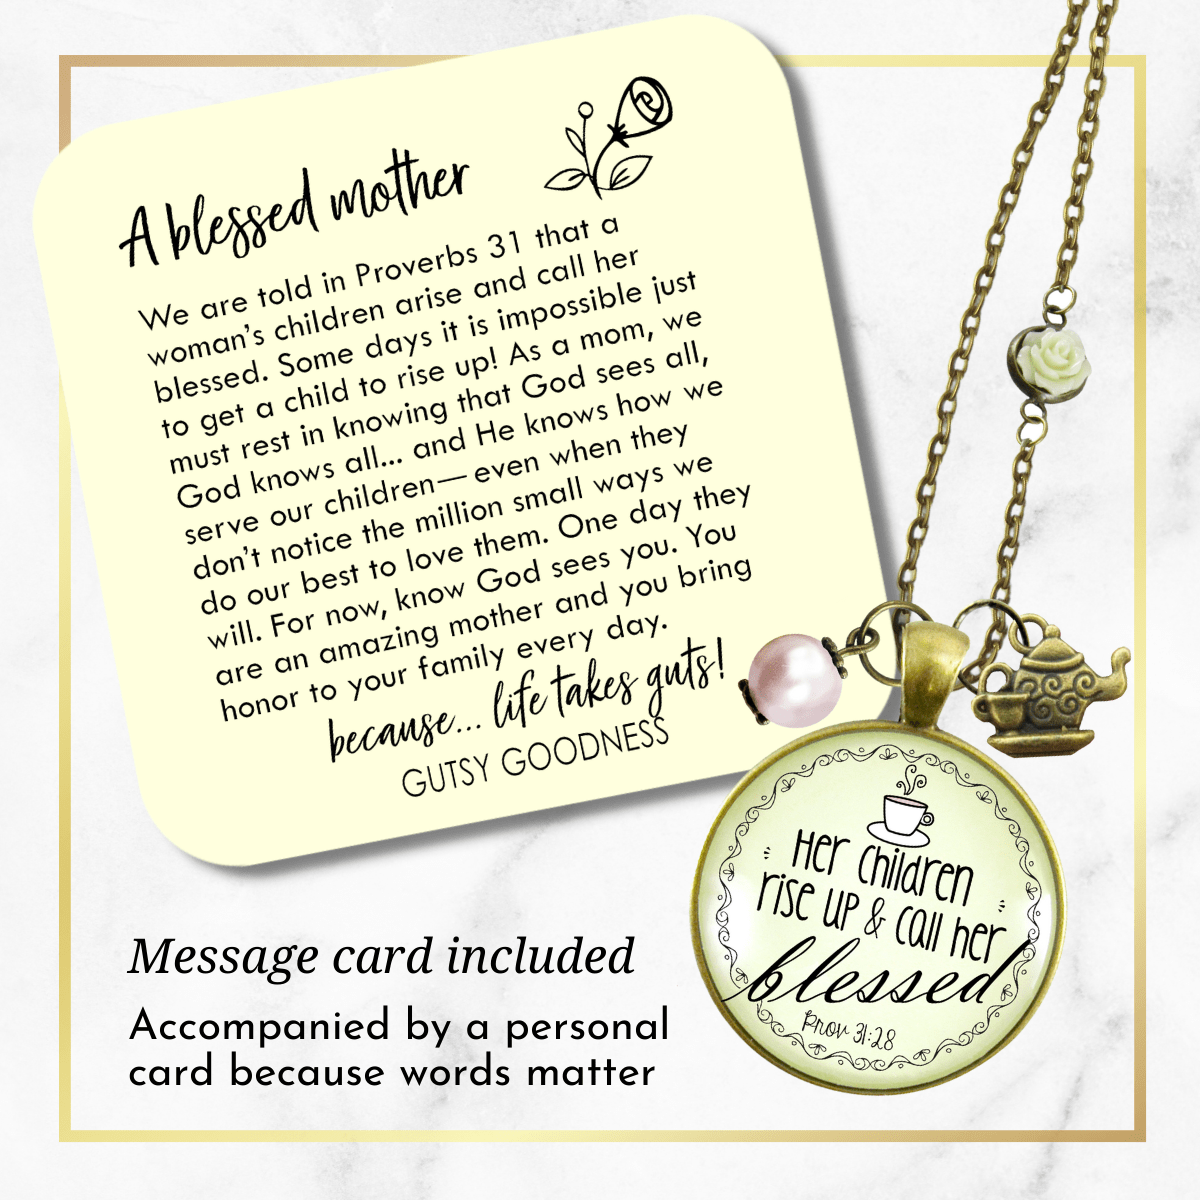 Gutsy Goodness Blessed Mother Necklace Proverb 31 Christian Mom Jewelry Teapot Charm Rose Chain - Gutsy Goodness Handmade Jewelry;Blessed Mother Necklace Proverb 31 Christian Mom Jewelry Teapot Charm Rose Chain - Gutsy Goodness Handmade Jewelry Gifts